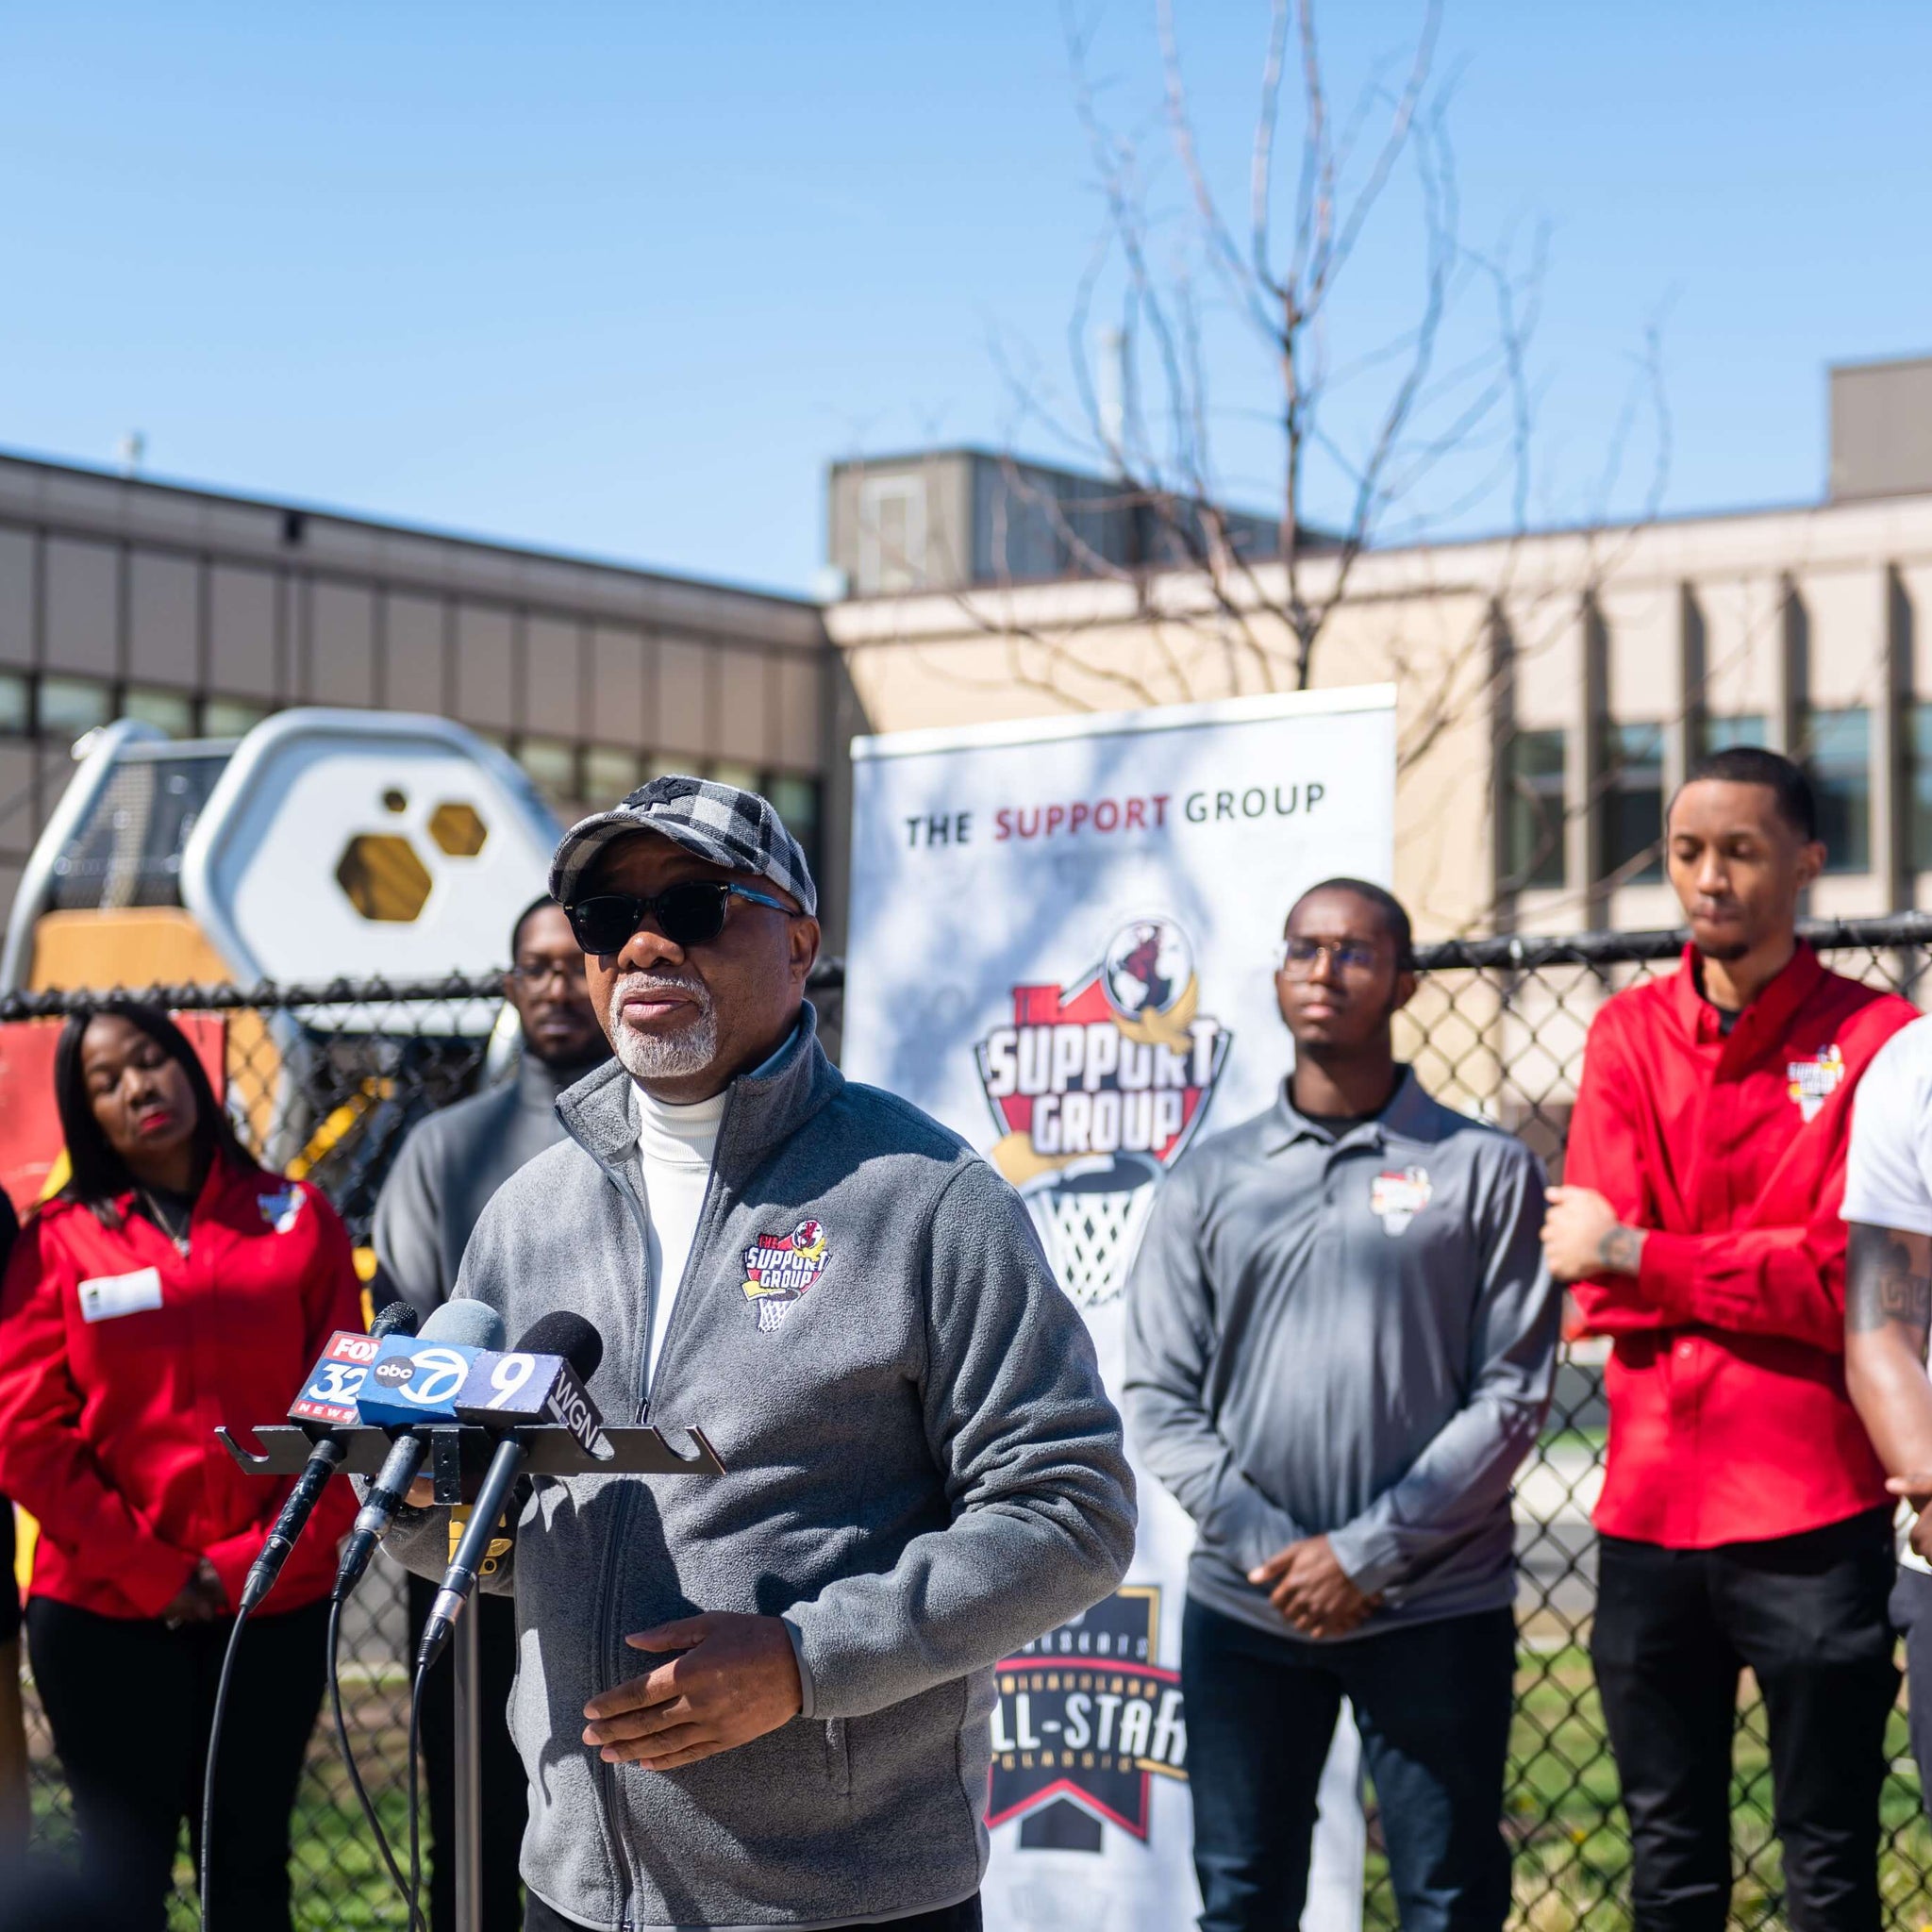 During National Youth Violence Prevention Week, Chicago Public Schools students call for resources